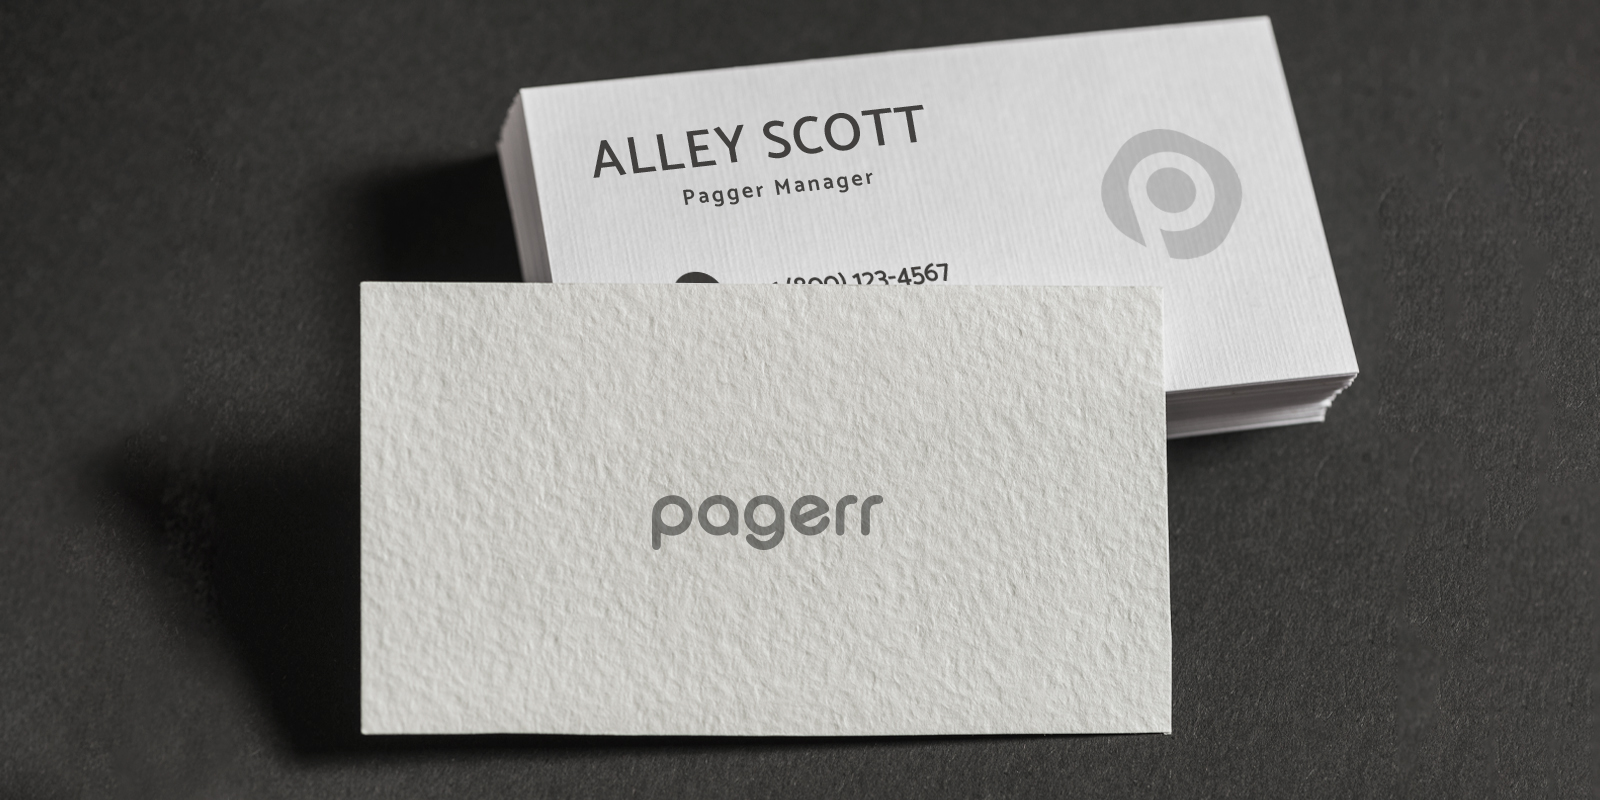 Special material business cards in Vilnius - Print with Pagerr